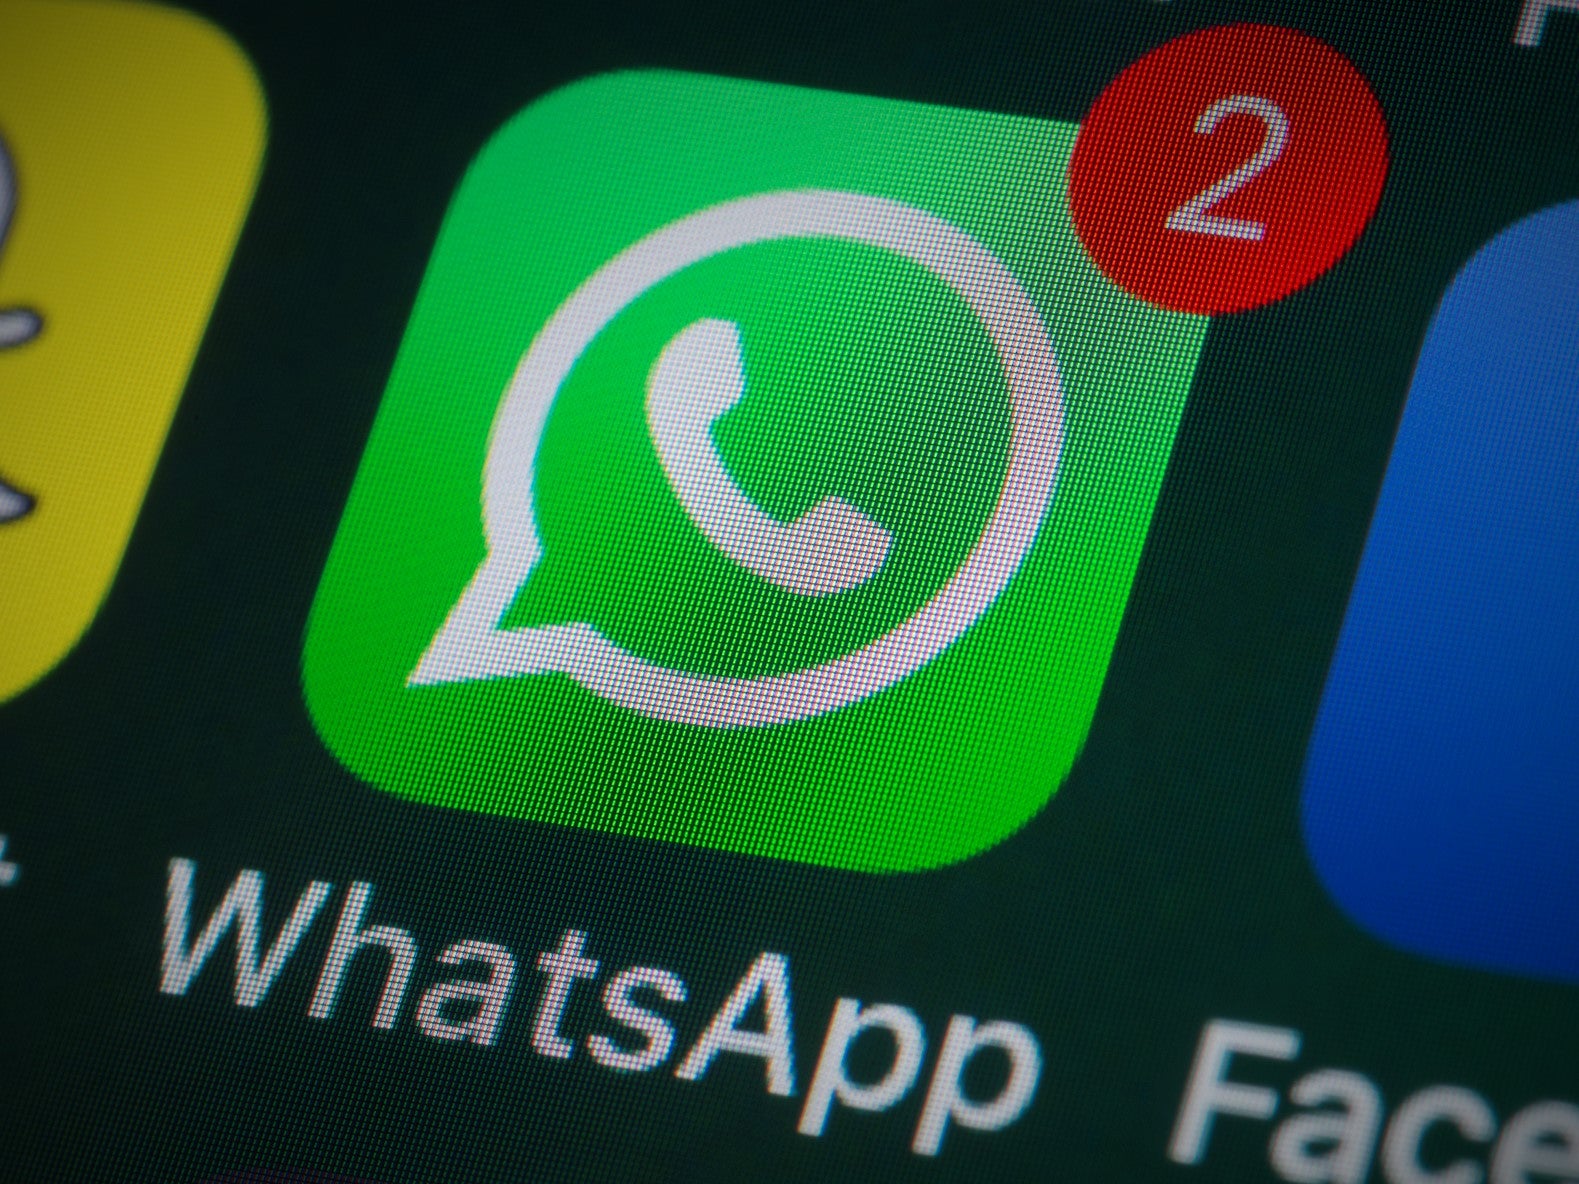 WhatsApp will make it seamless to transfer message history from iPhone to Android after the latest update